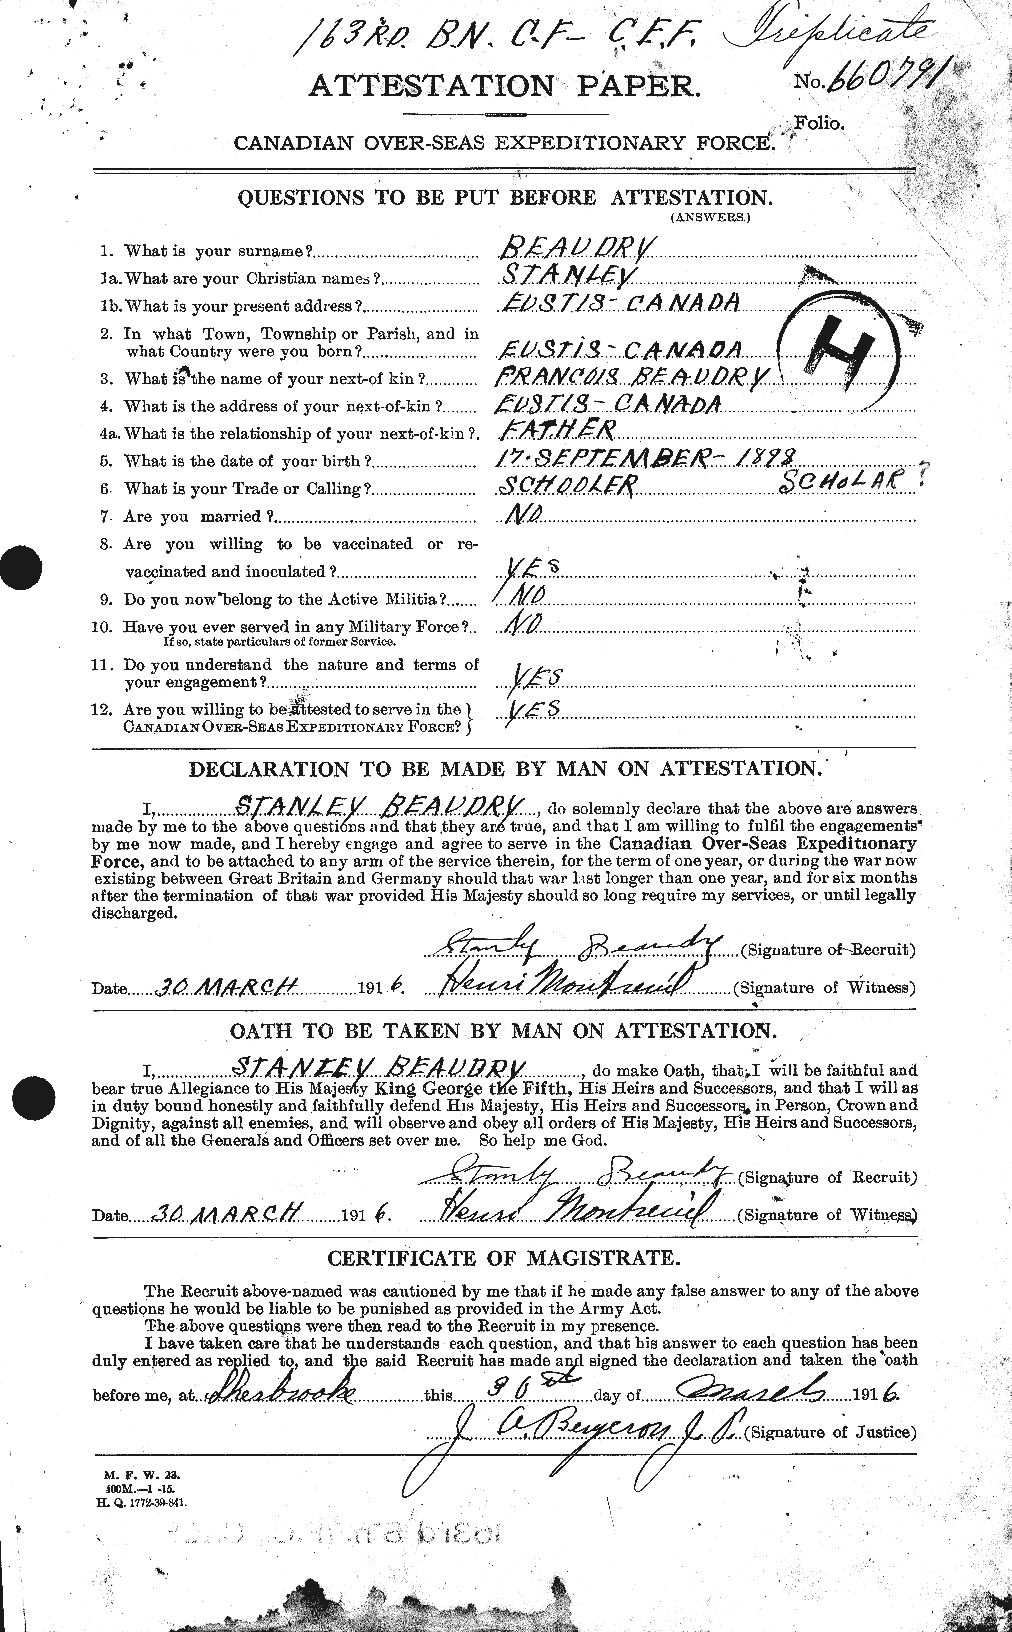 Personnel Records of the First World War - CEF 231403a